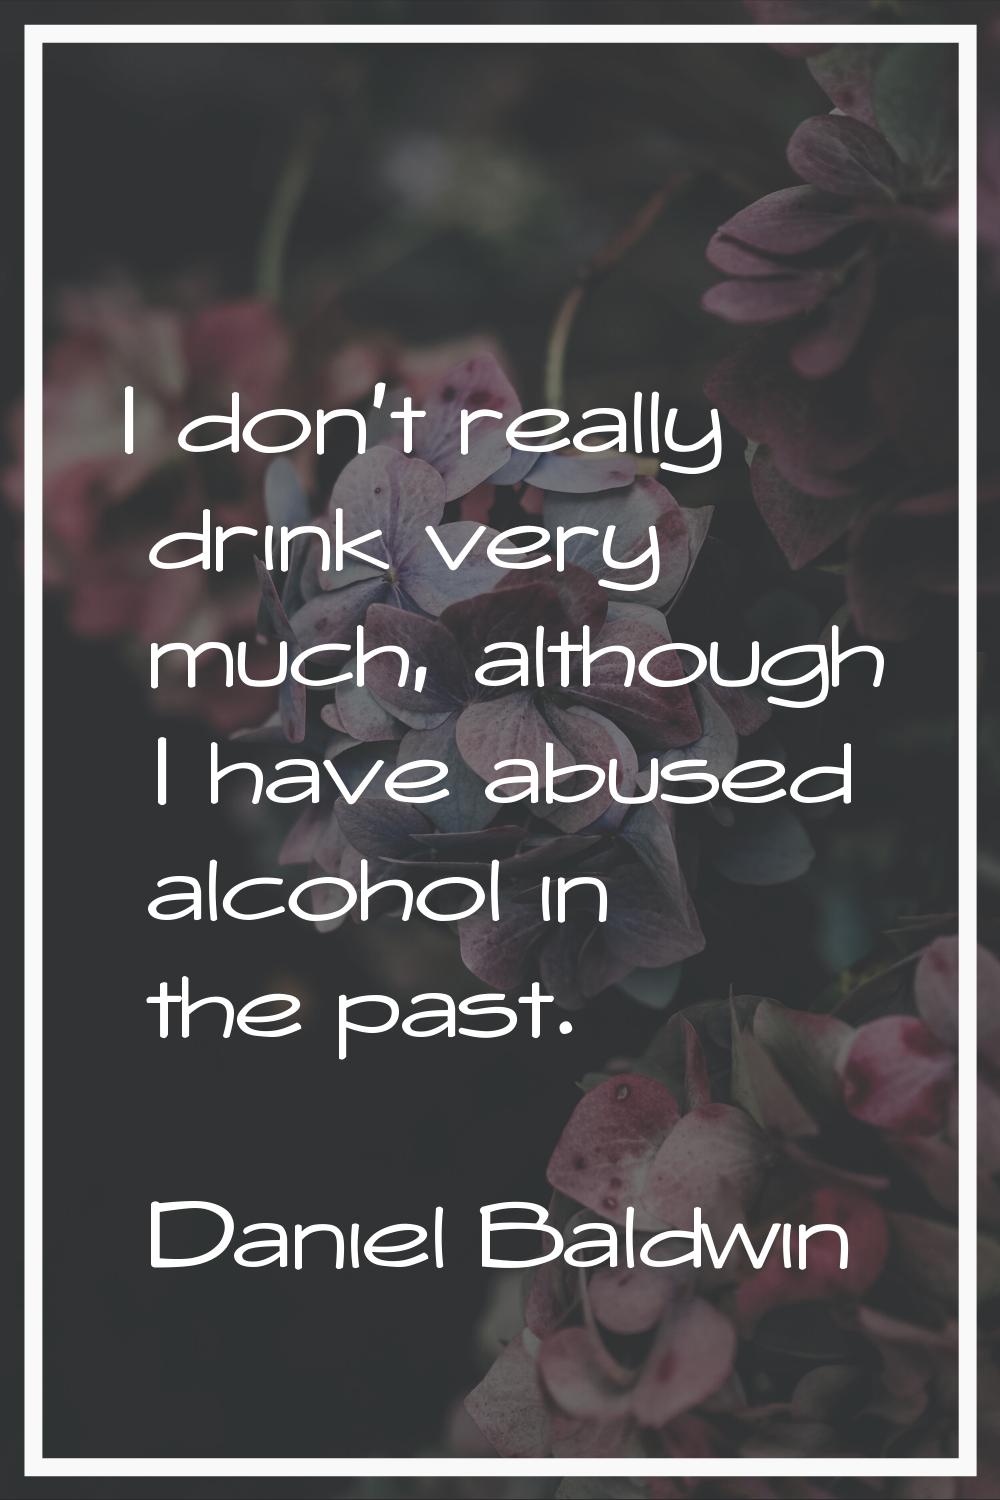 I don't really drink very much, although I have abused alcohol in the past.